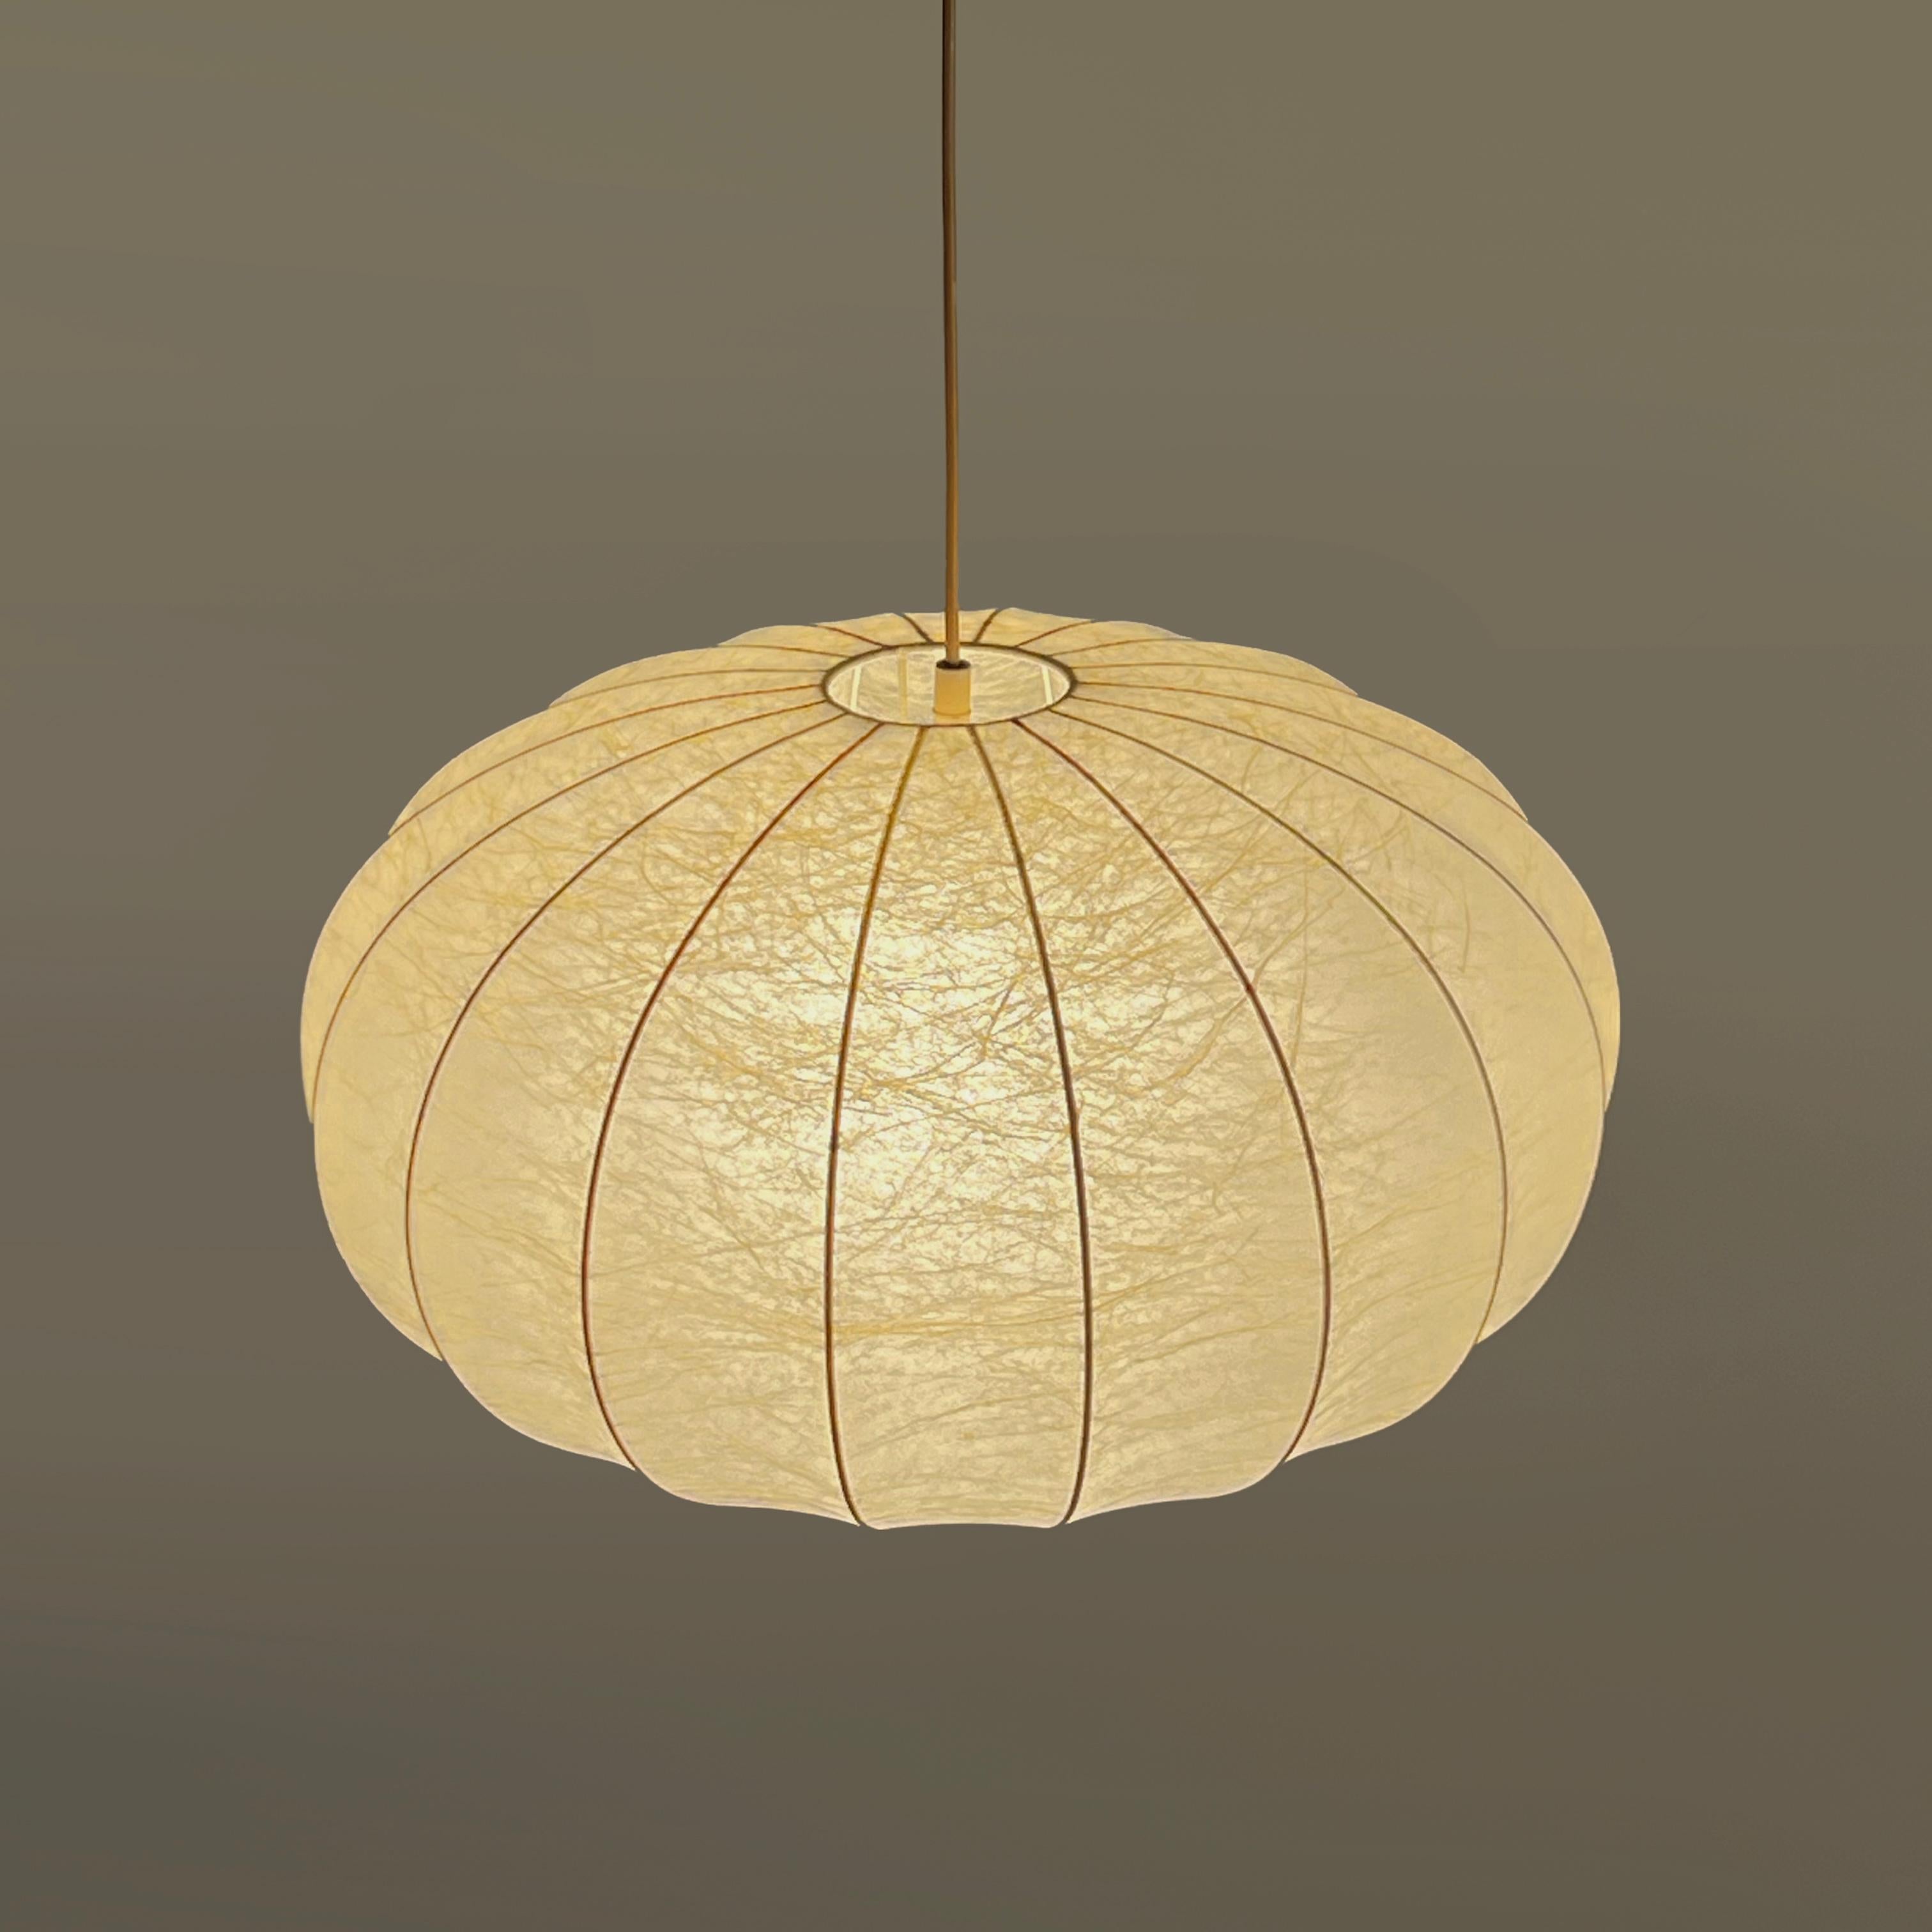 21.6 Inches Space Age Cocoon Pendant Lamp by Friedel Wauer for Goldkant Leuchten 1